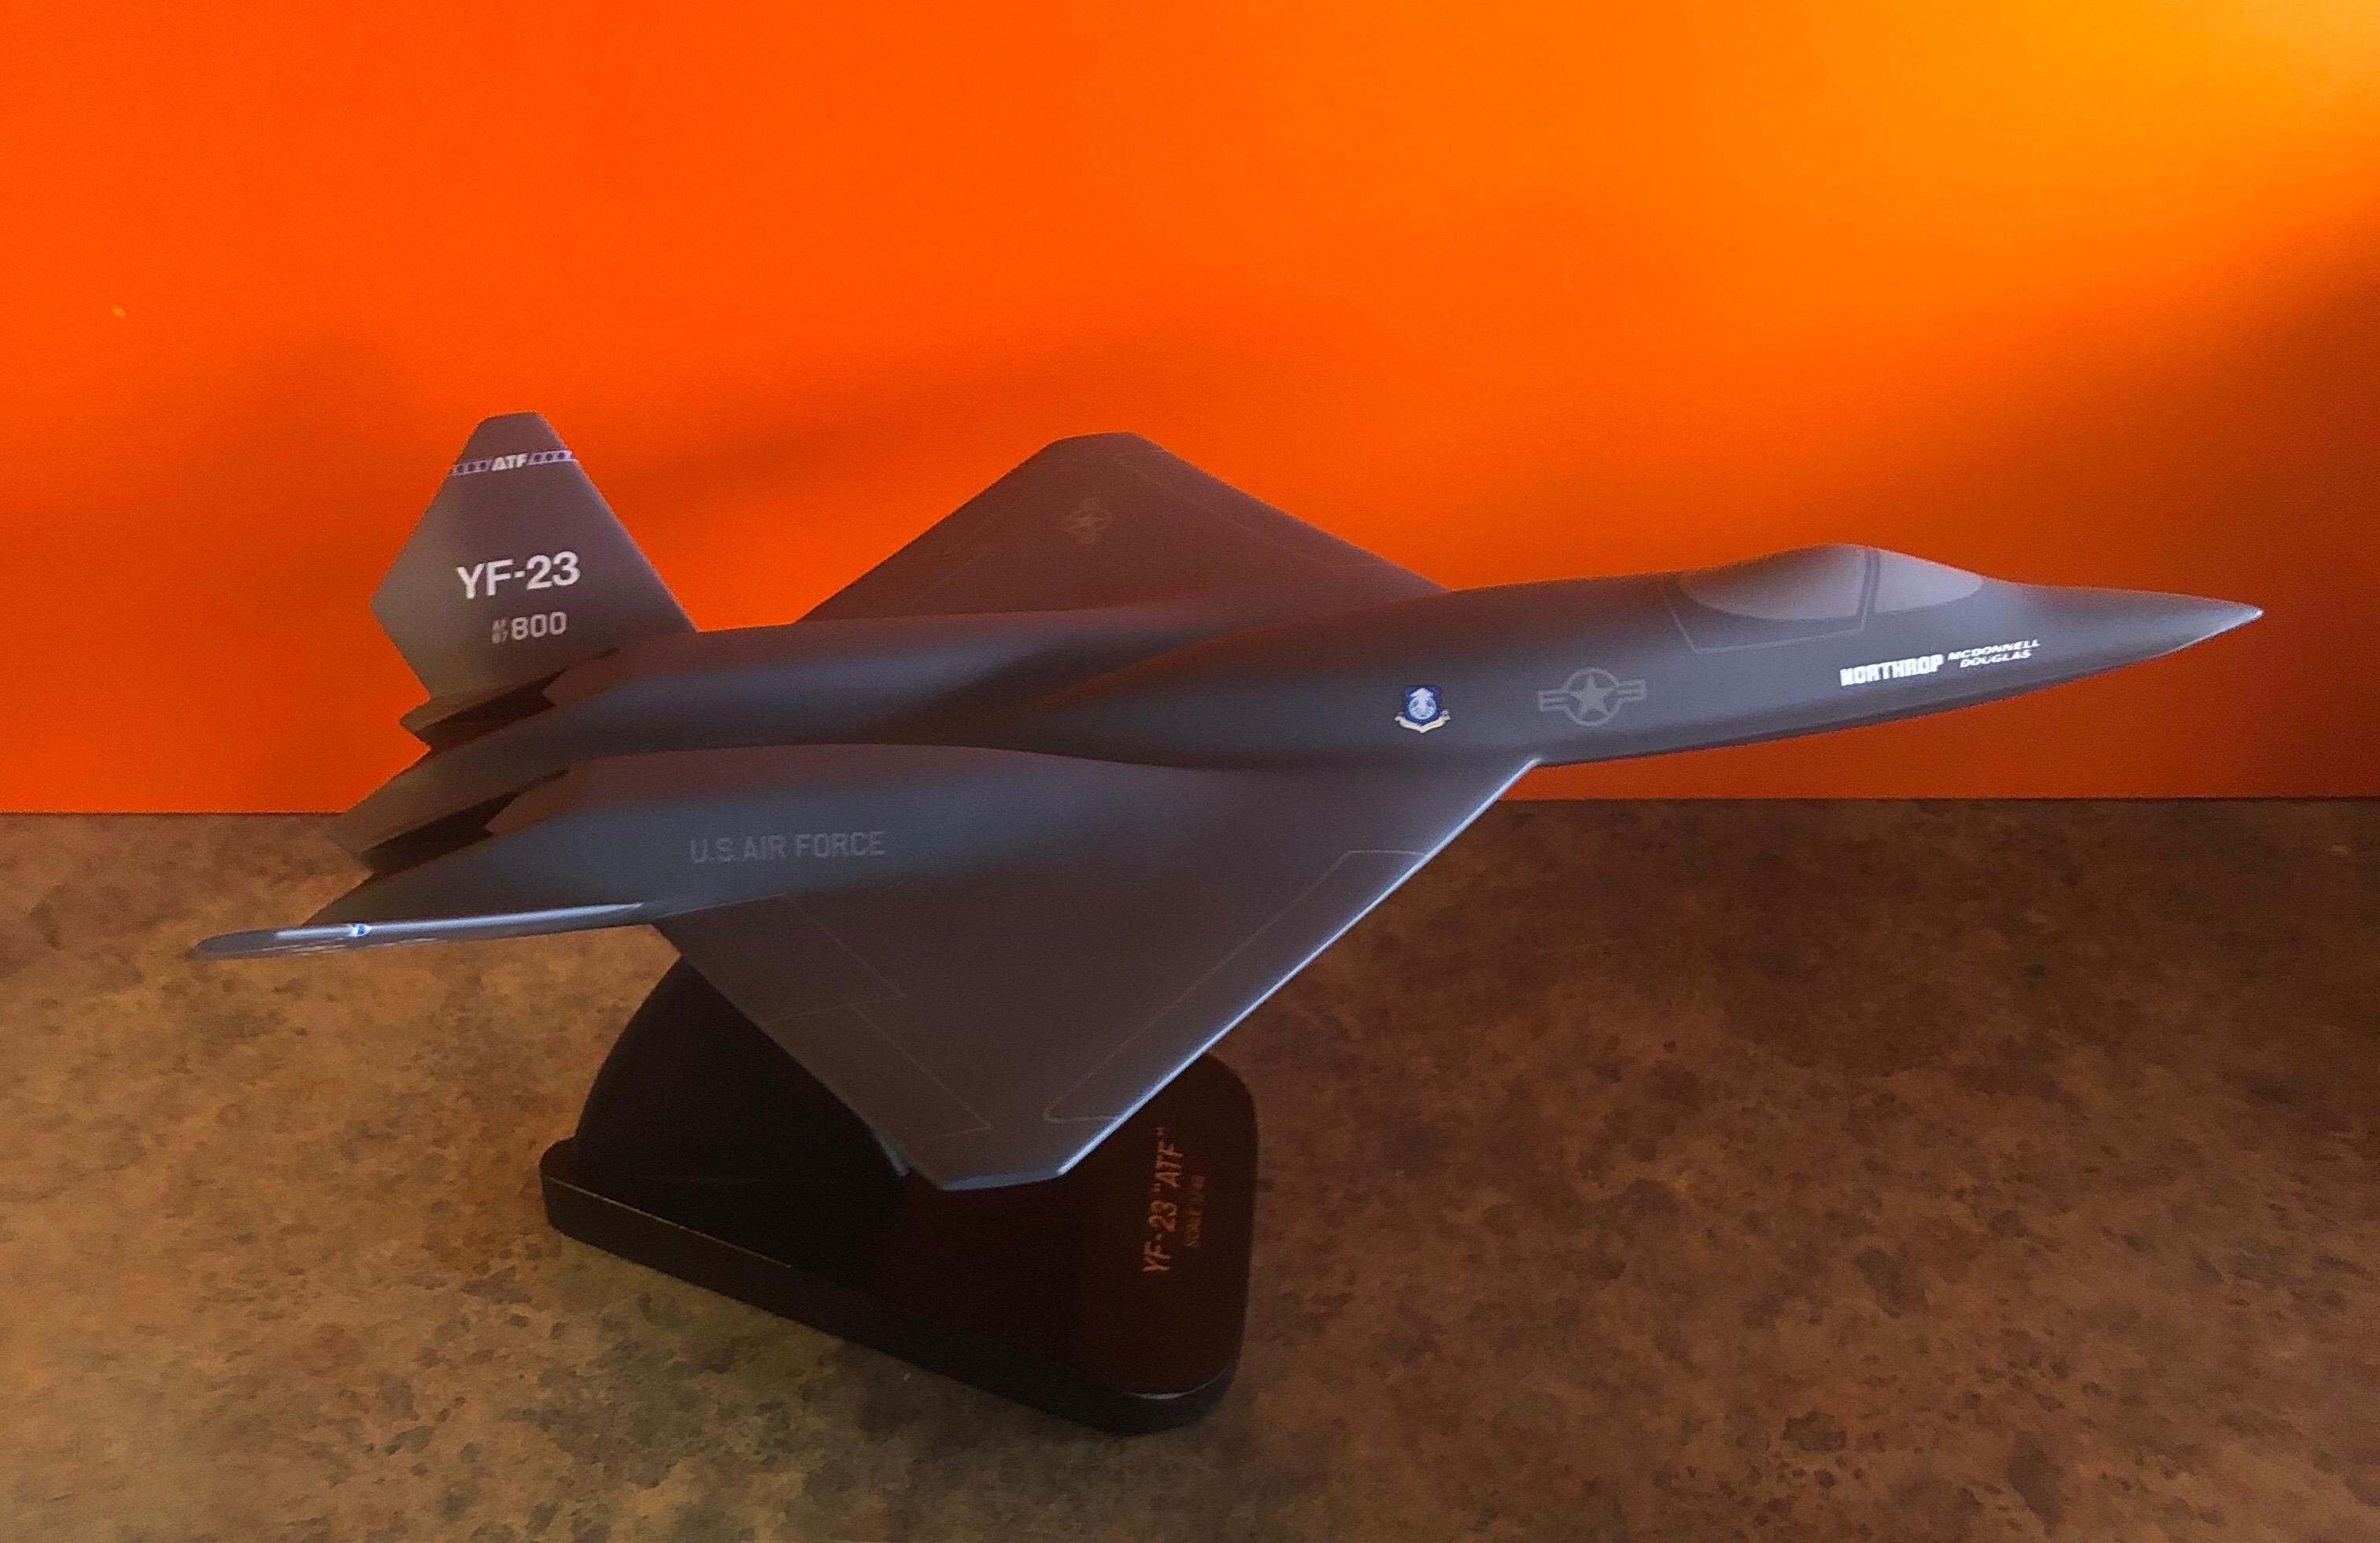 A very cool U.S. Air Force YF-23 Advanced Tactical Fighter (ATF) contractor desk model, circa late 1980s. The piece is in very good condition and super high quality. It is made of wood and mounted on a triangular wooden base; this is a very large